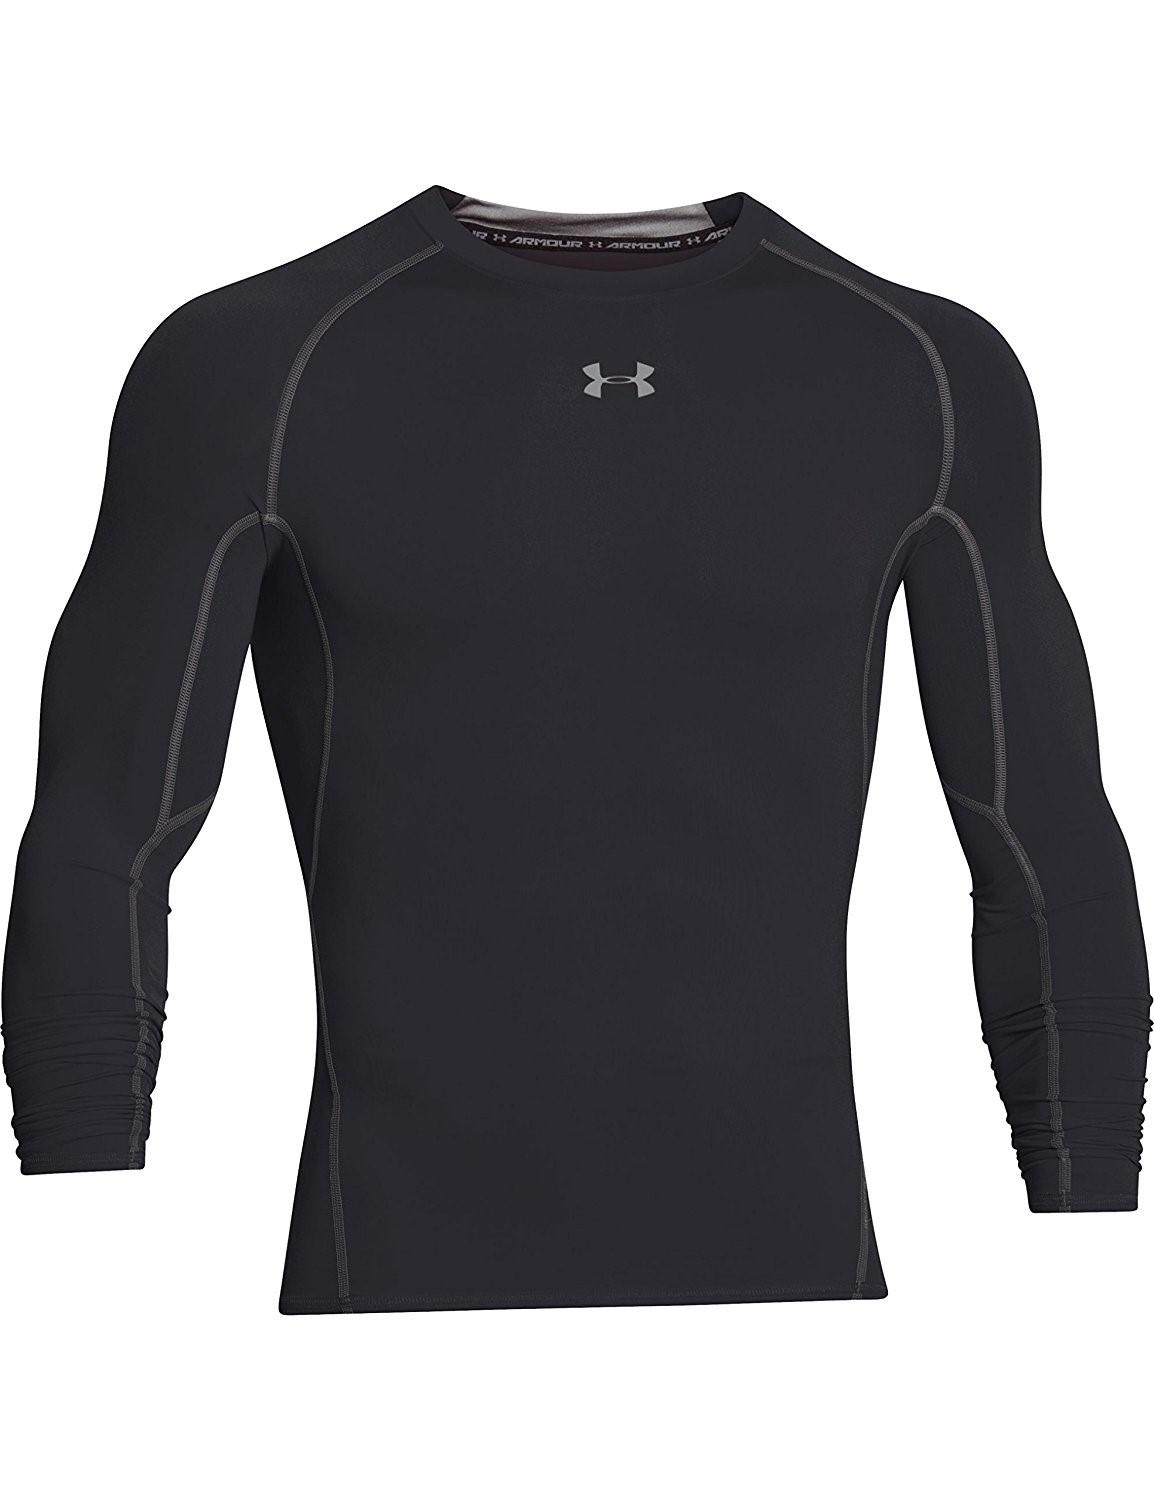 Lyst - Under Armour Heatgear Armour Compression Shirt - Long-sleeve in ...